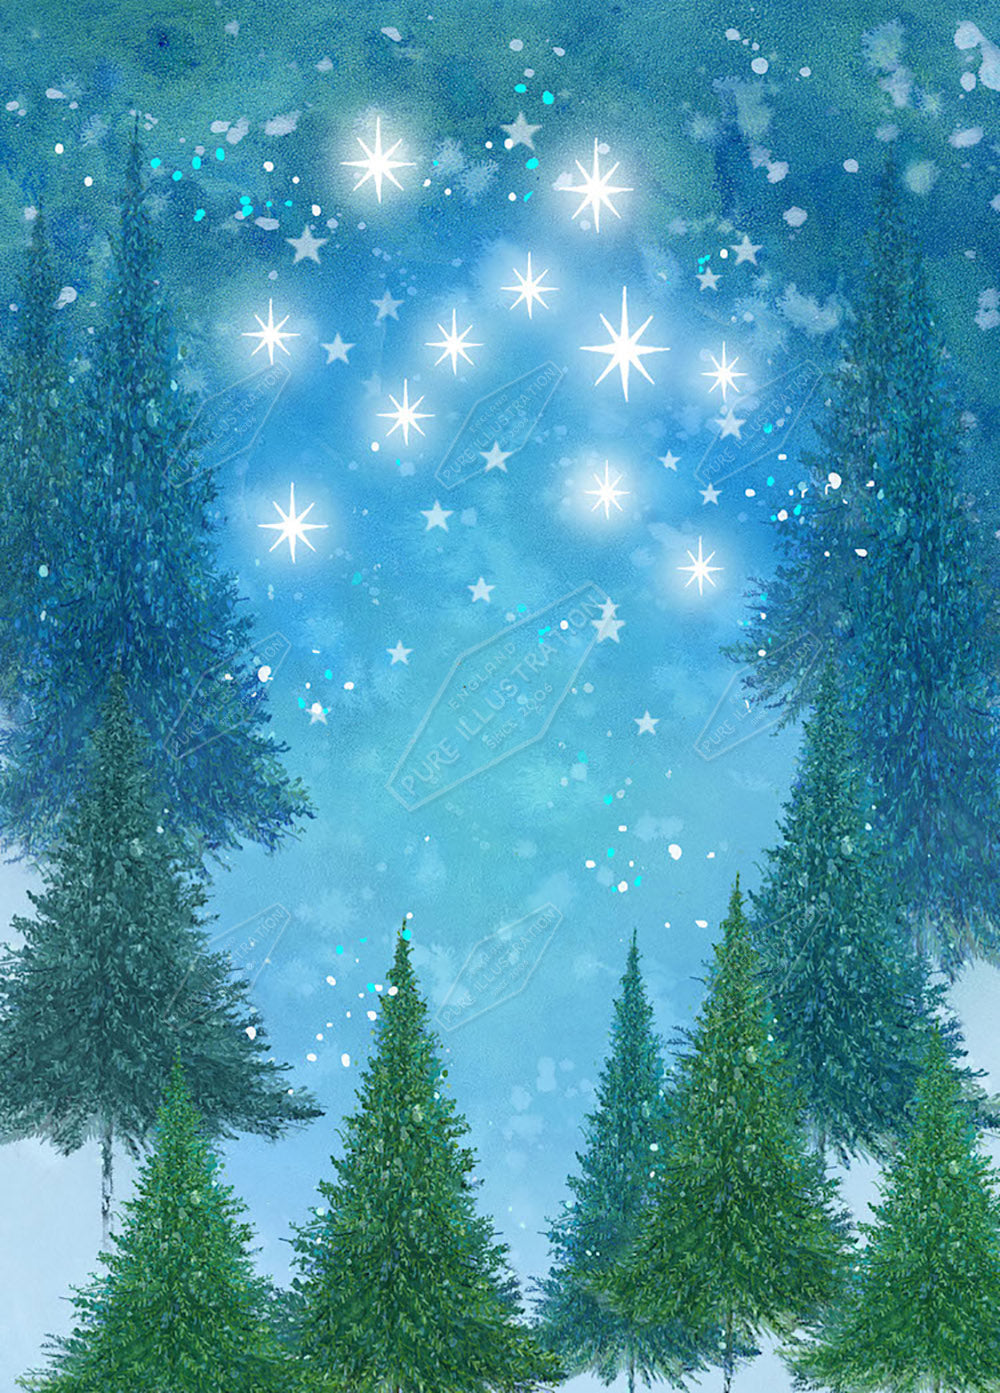 00027137JPA- Jan Pashley is represented by Pure Art Licensing Agency - Christmas Greeting Card Design